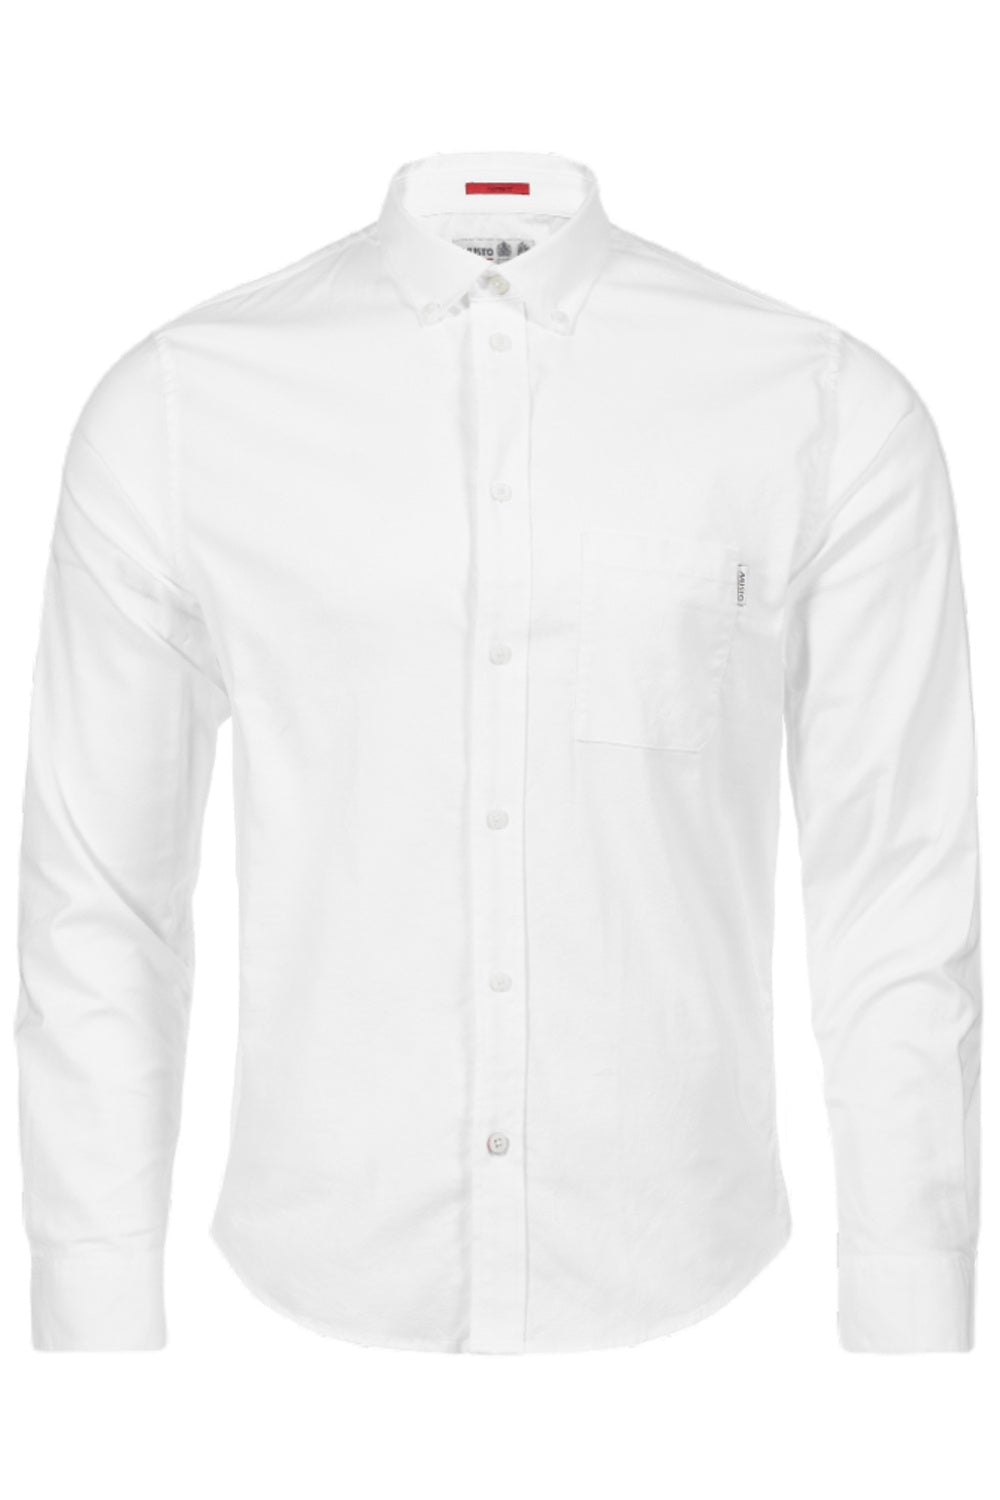 Musto Essentials Long Sleeve Oxford Shirt In White